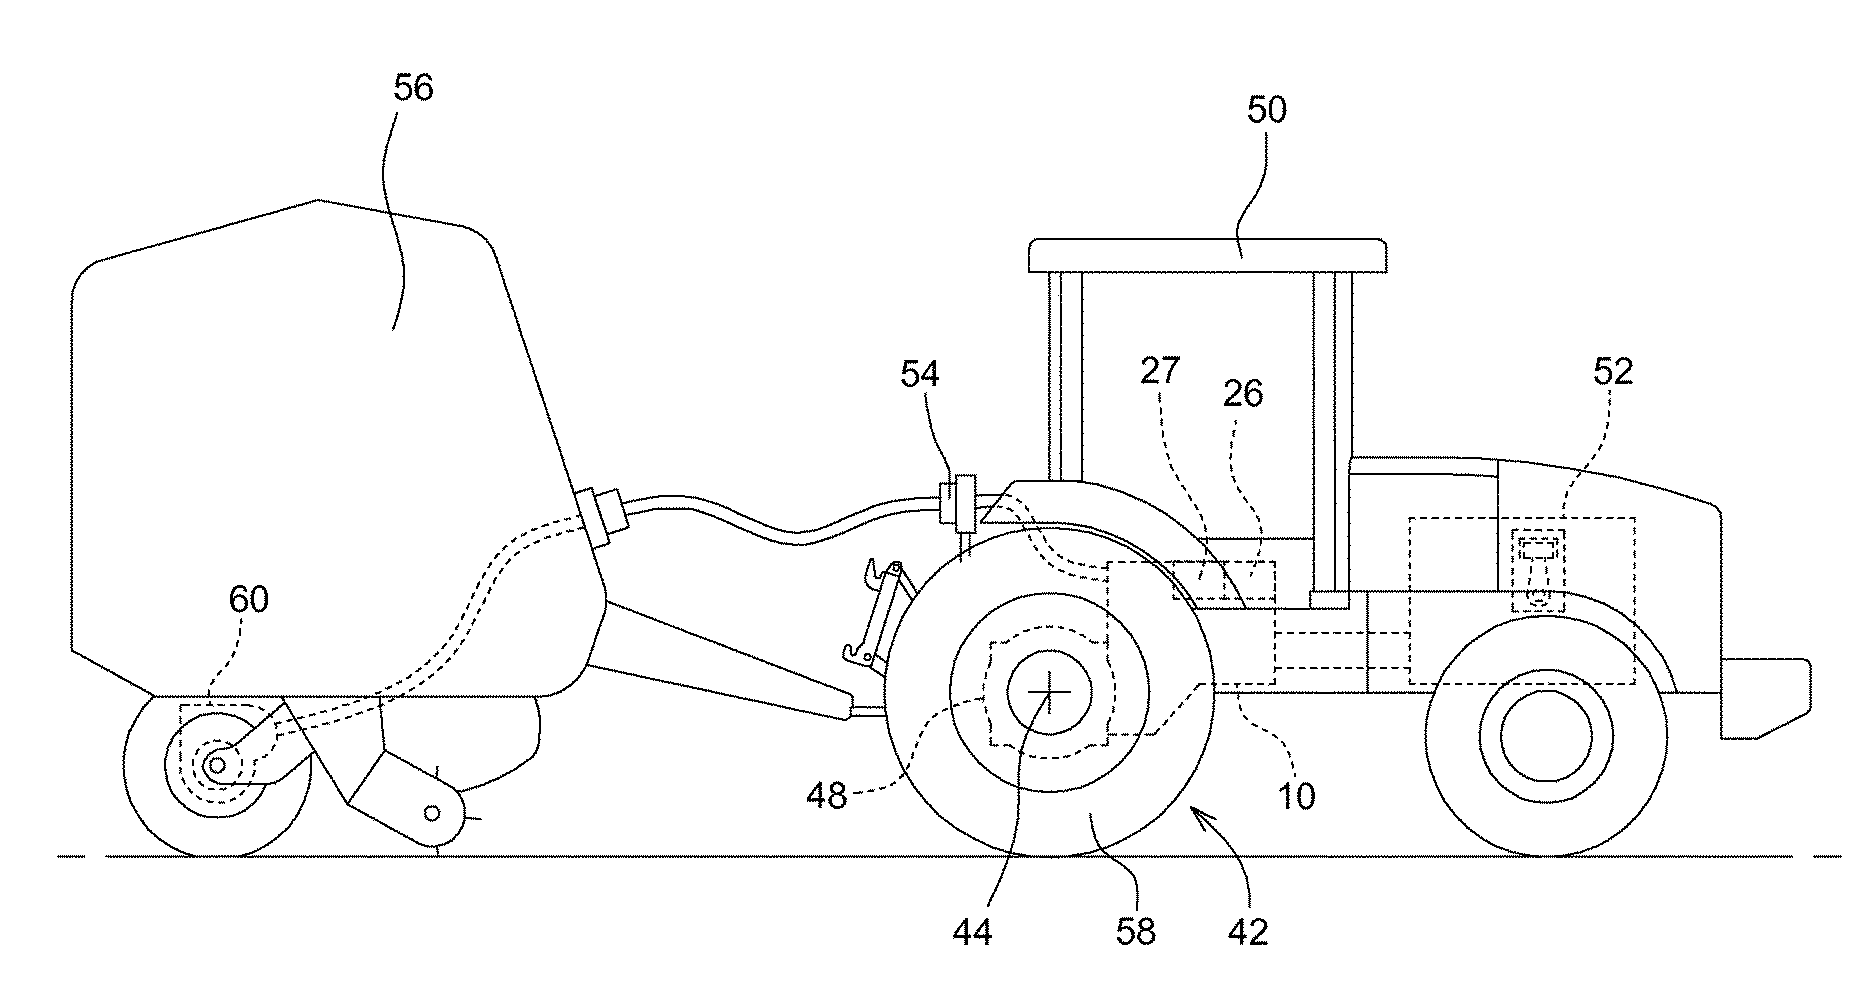 Method for controlling gear shift